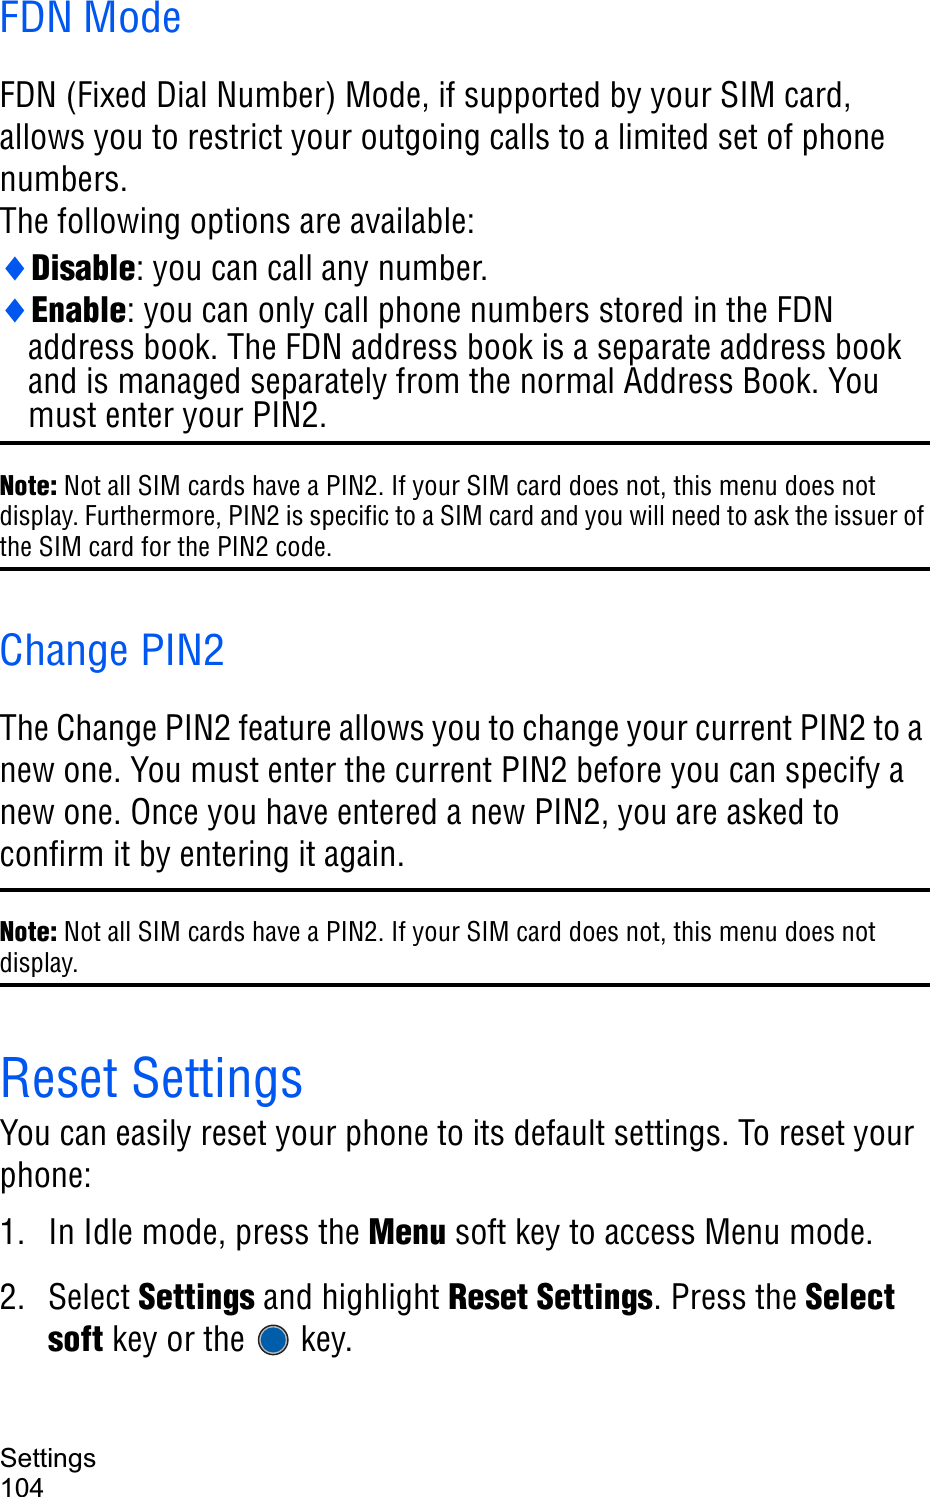 Settings104FDN ModeFDN (Fixed Dial Number) Mode, if supported by your SIM card, allows you to restrict your outgoing calls to a limited set of phone numbers.The following options are available:iDisable: you can call any number.iEnable: you can only call phone numbers stored in the FDN address book. The FDN address book is a separate address book and is managed separately from the normal Address Book. You must enter your PIN2.Note: Not all SIM cards have a PIN2. If your SIM card does not, this menu does not display. Furthermore, PIN2 is specific to a SIM card and you will need to ask the issuer of the SIM card for the PIN2 code.Change PIN2The Change PIN2 feature allows you to change your current PIN2 to a new one. You must enter the current PIN2 before you can specify a new one. Once you have entered a new PIN2, you are asked to confirm it by entering it again.Note: Not all SIM cards have a PIN2. If your SIM card does not, this menu does not display.Reset SettingsYou can easily reset your phone to its default settings. To reset your phone: 1. In Idle mode, press the Menu soft key to access Menu mode.2. Select Settings and highlight Reset Settings. Press the Selectsoft key or the   key.